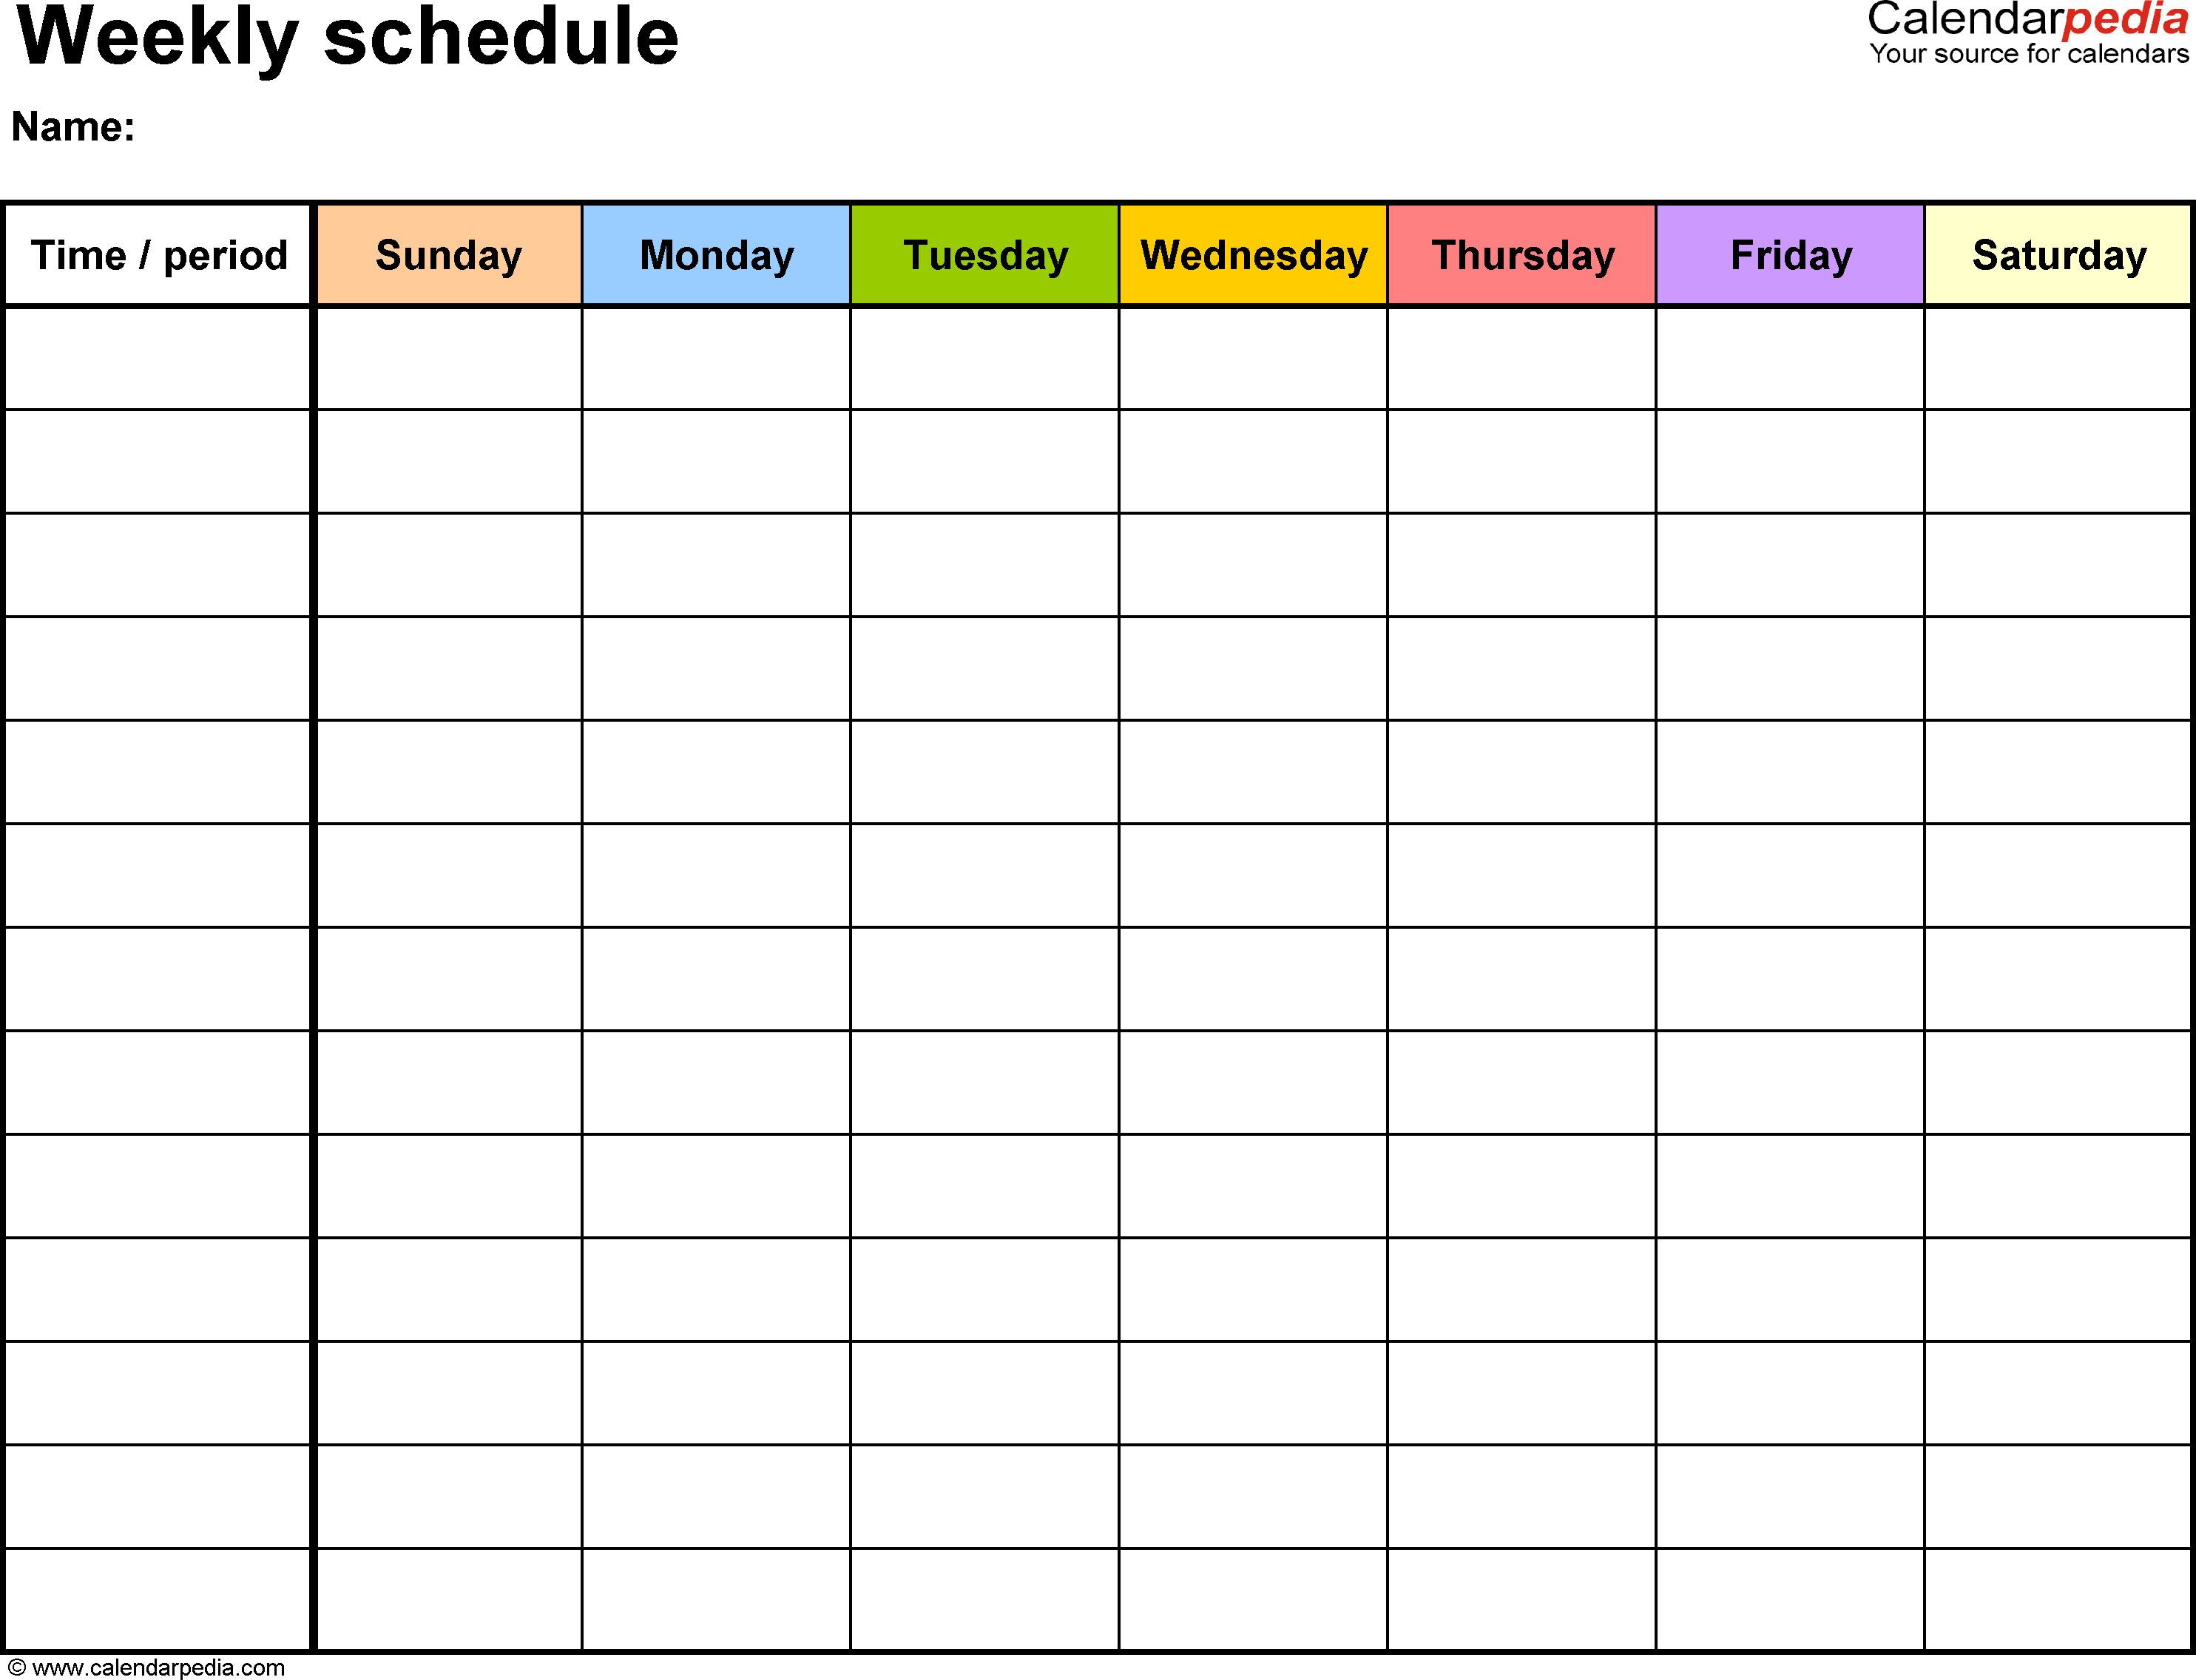 Free Weekly Schedule Templates For Word - 18 Templates - Free Printable Blank Work Schedules